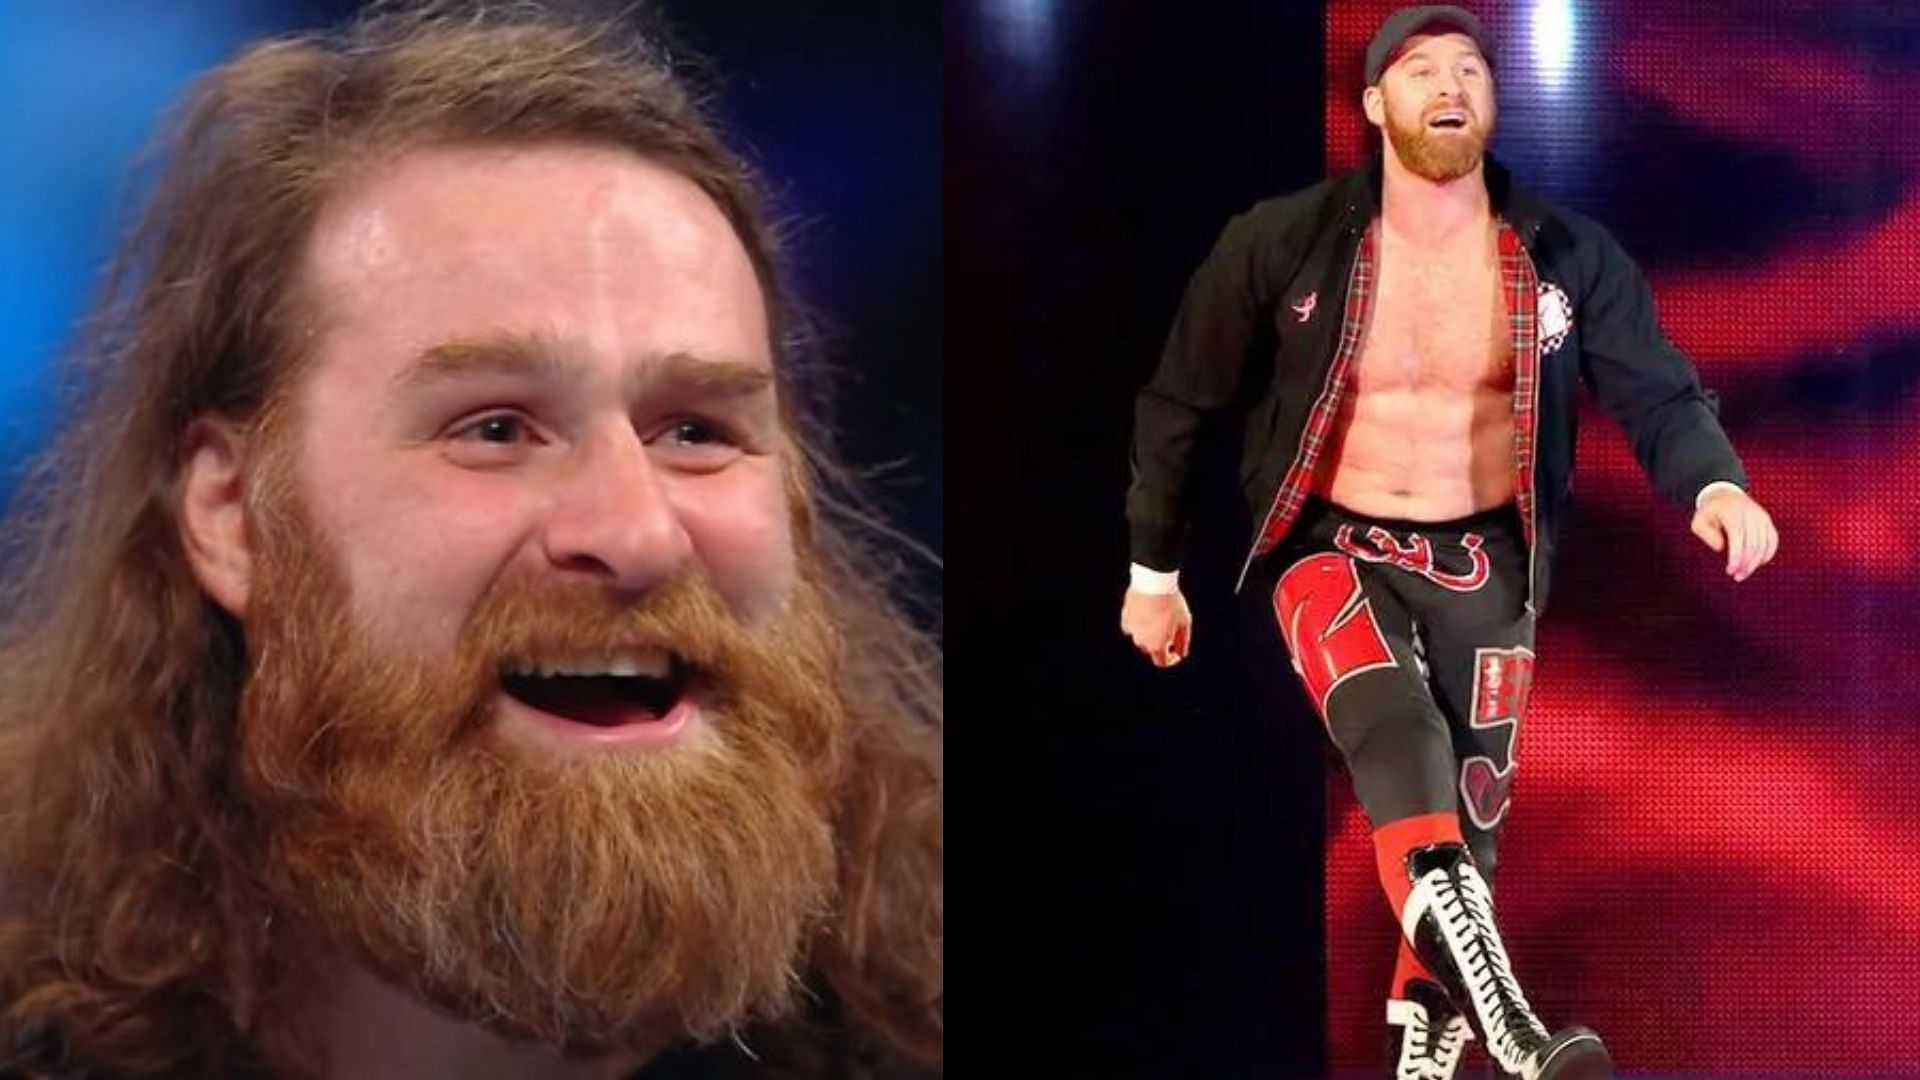 Sami Zayn brought back his old theme song on SmackDown